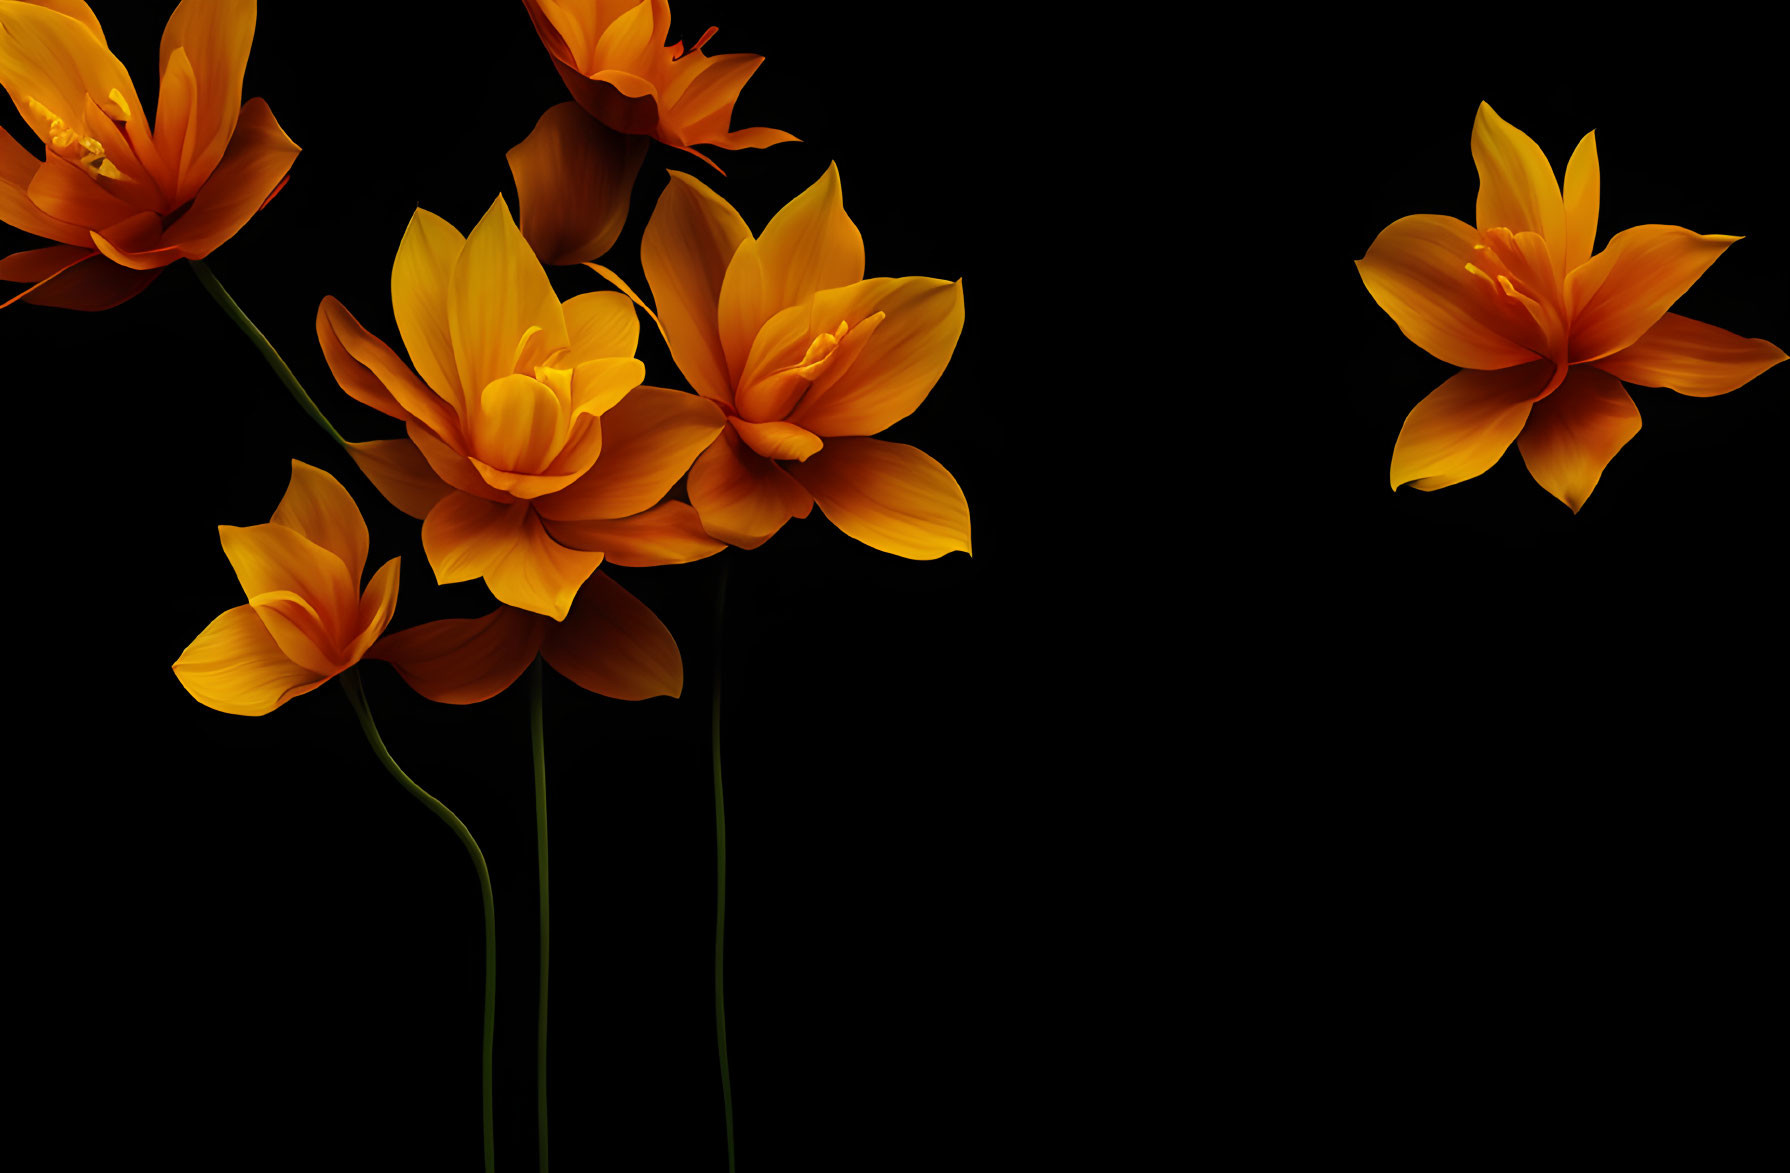 Bright Orange Flowers with Overlapping Petals on Long Stems Against Dark Background